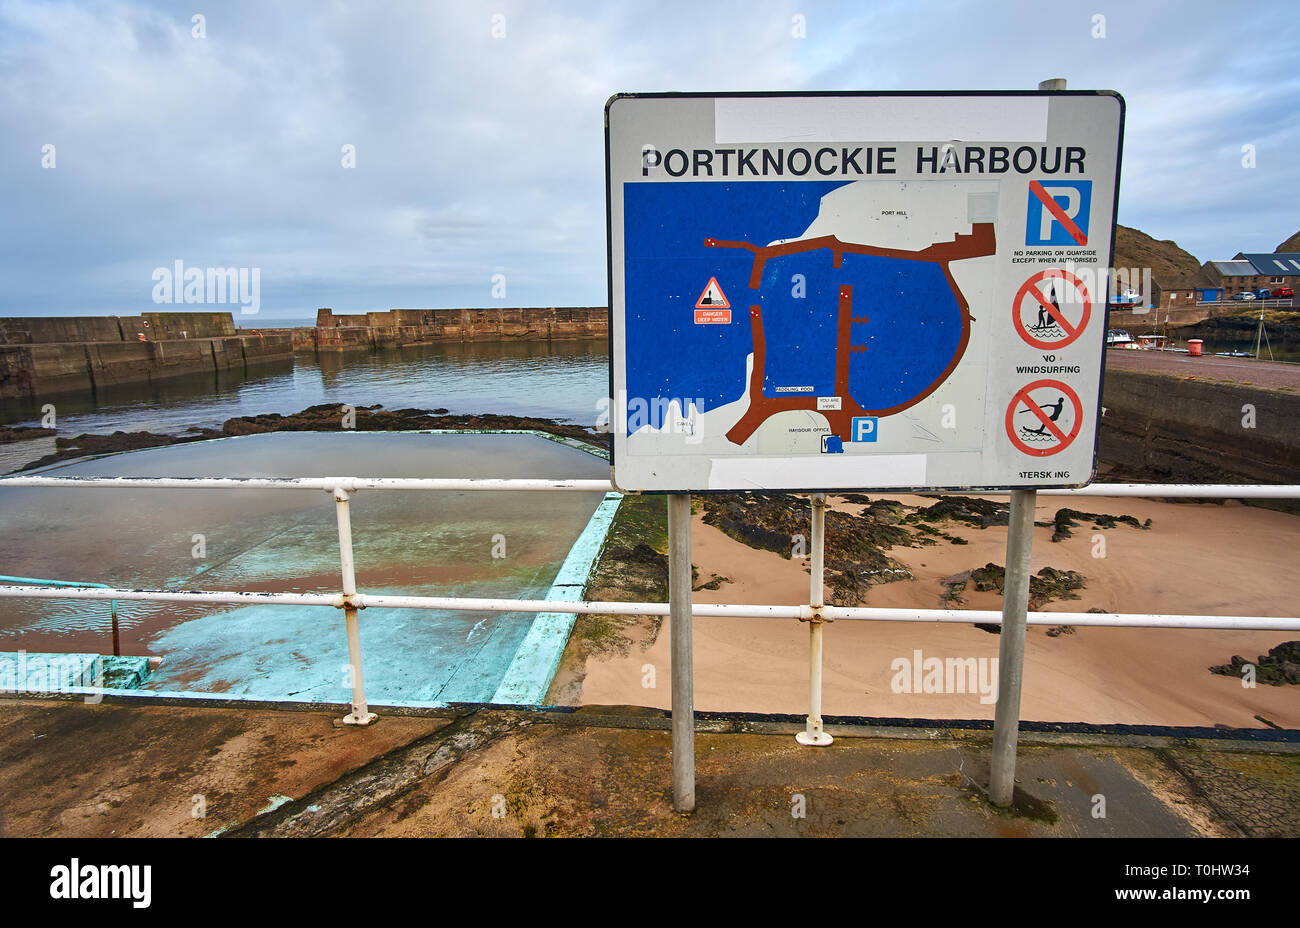 Tidal pool in Portknockie harbour, an old Scottish fishing village located in Moray Firth, UK. Stock Photo